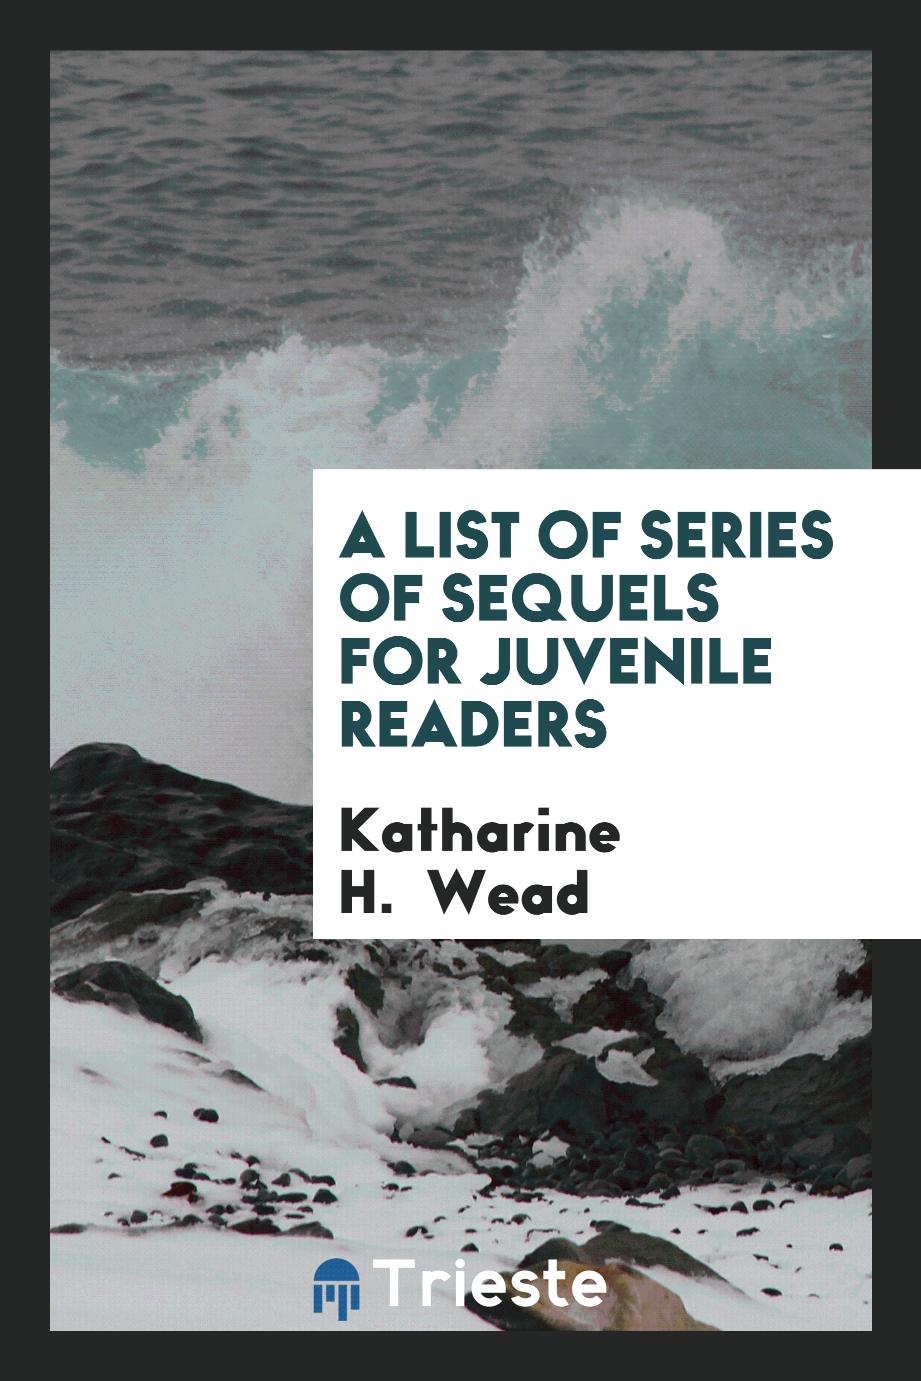 A List of Series of Sequels for Juvenile Readers